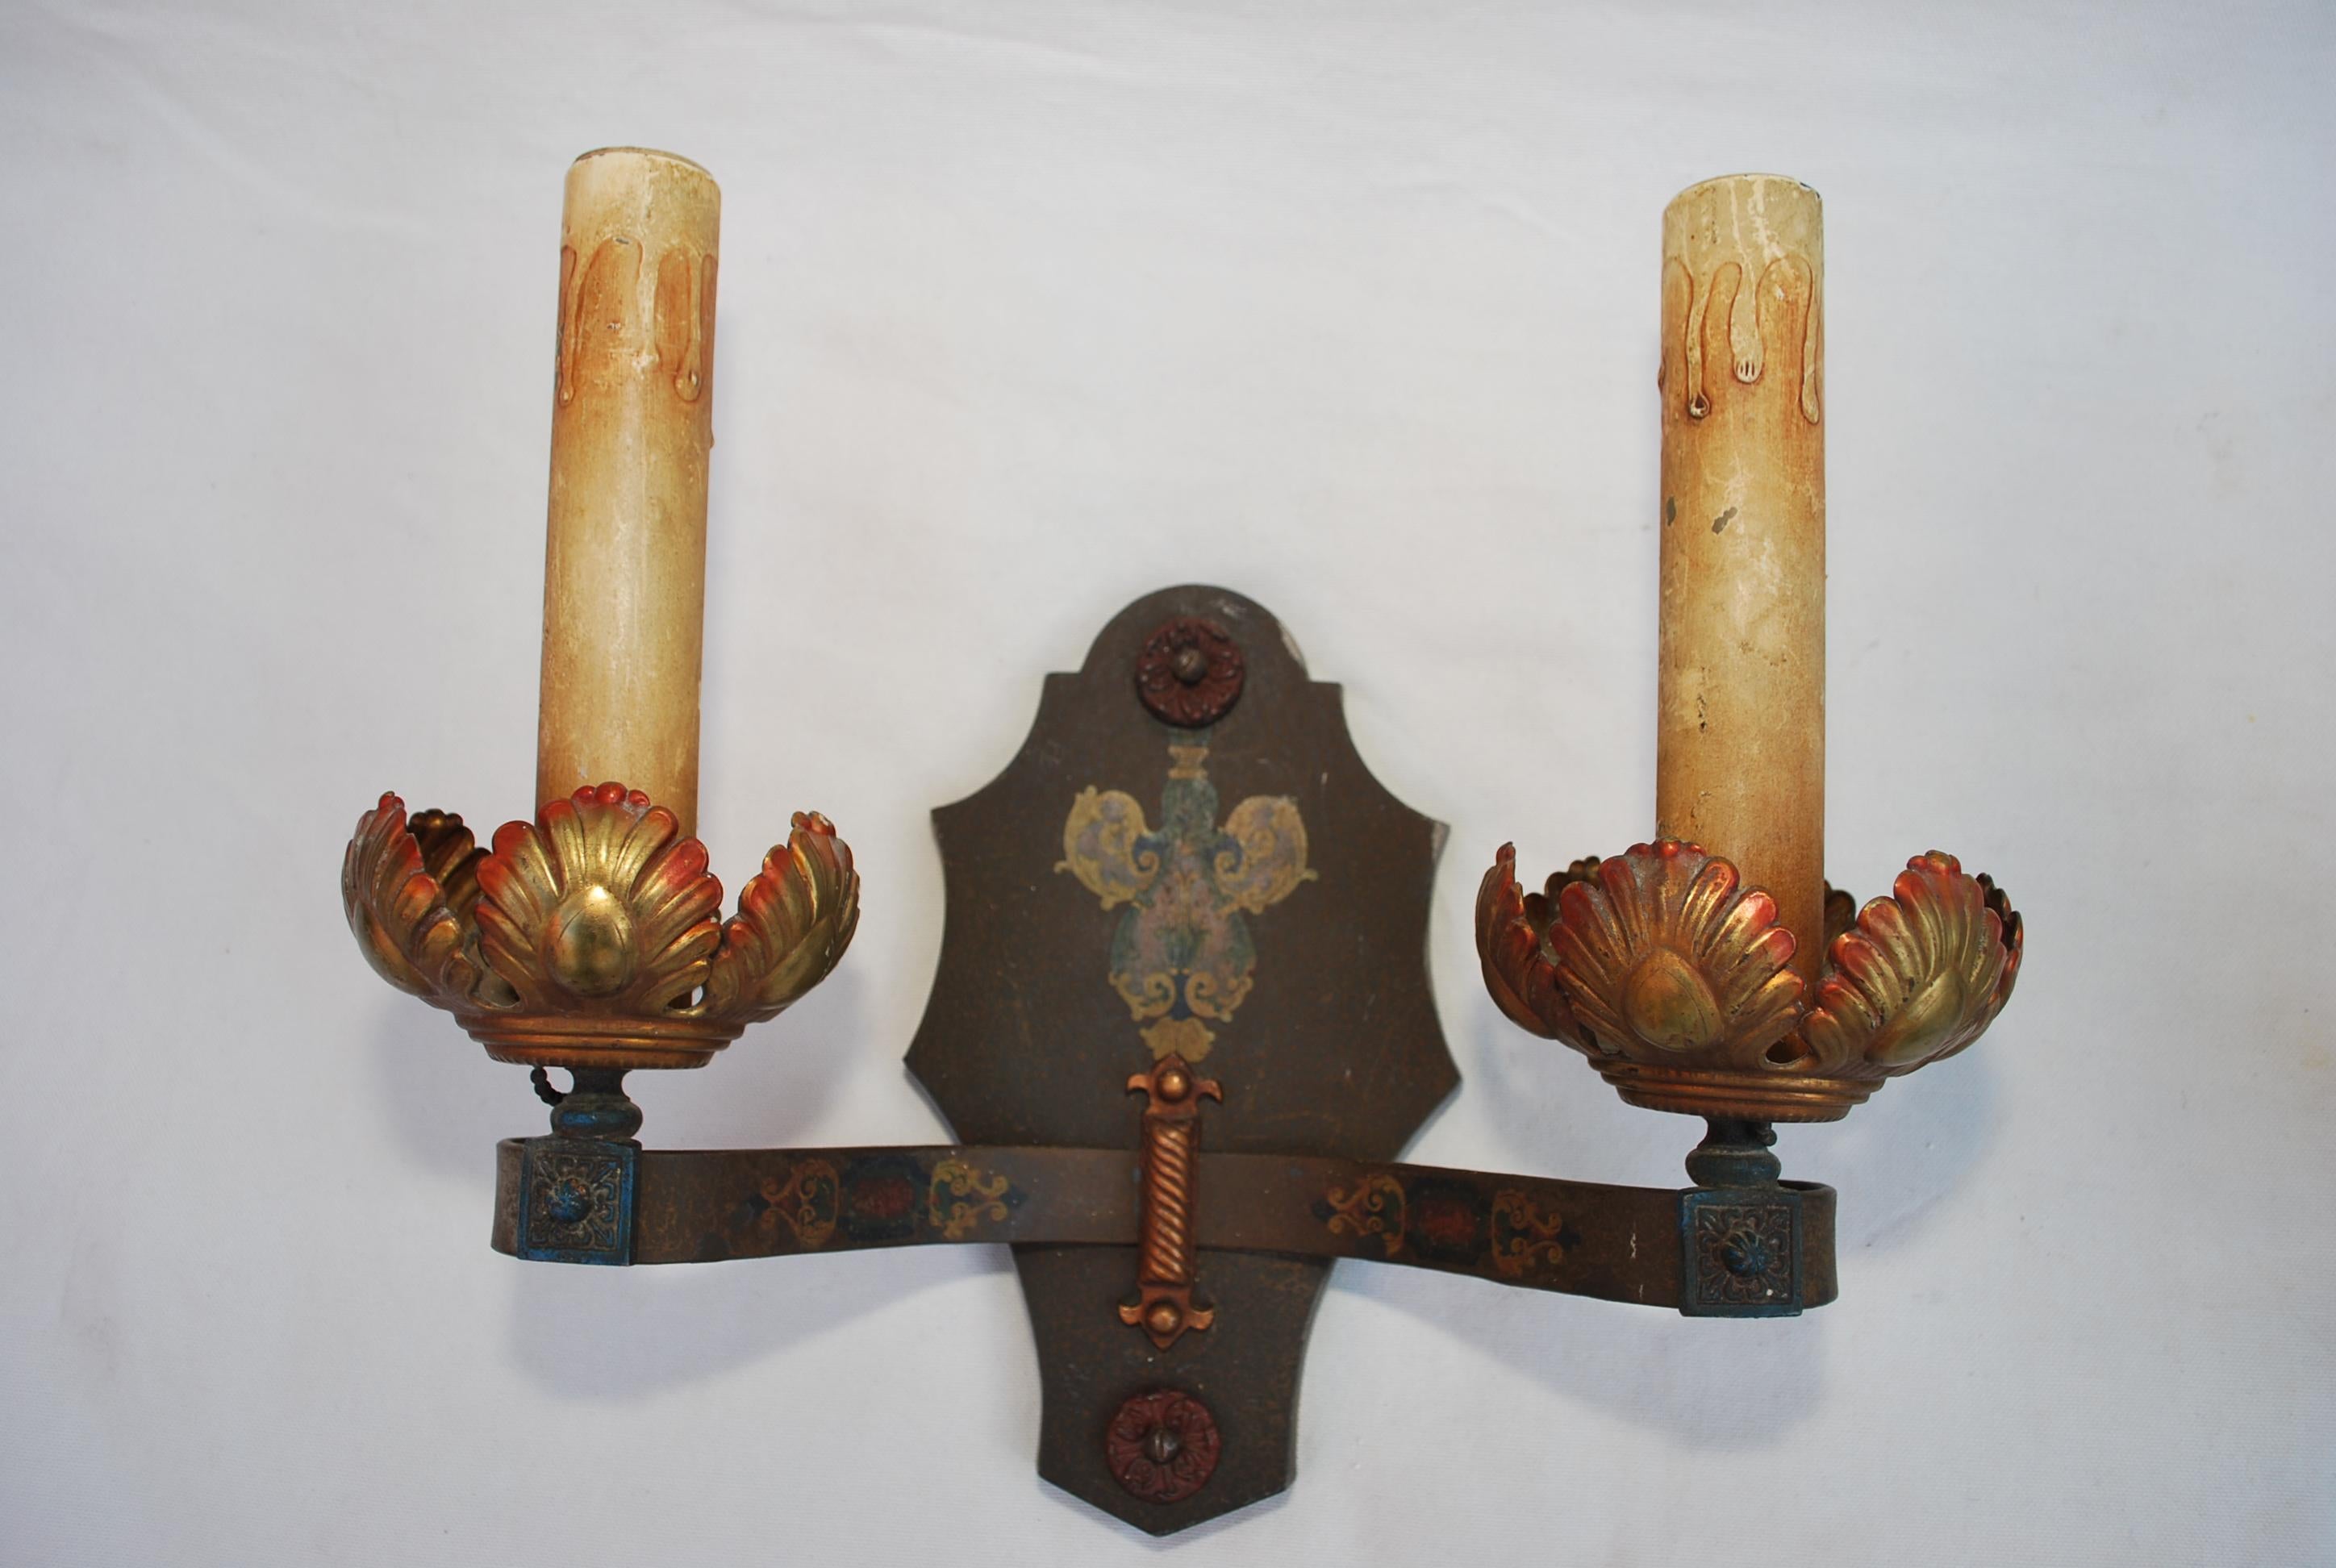 An elegant pair of 1920's sconces, the patina is so much nicer in person